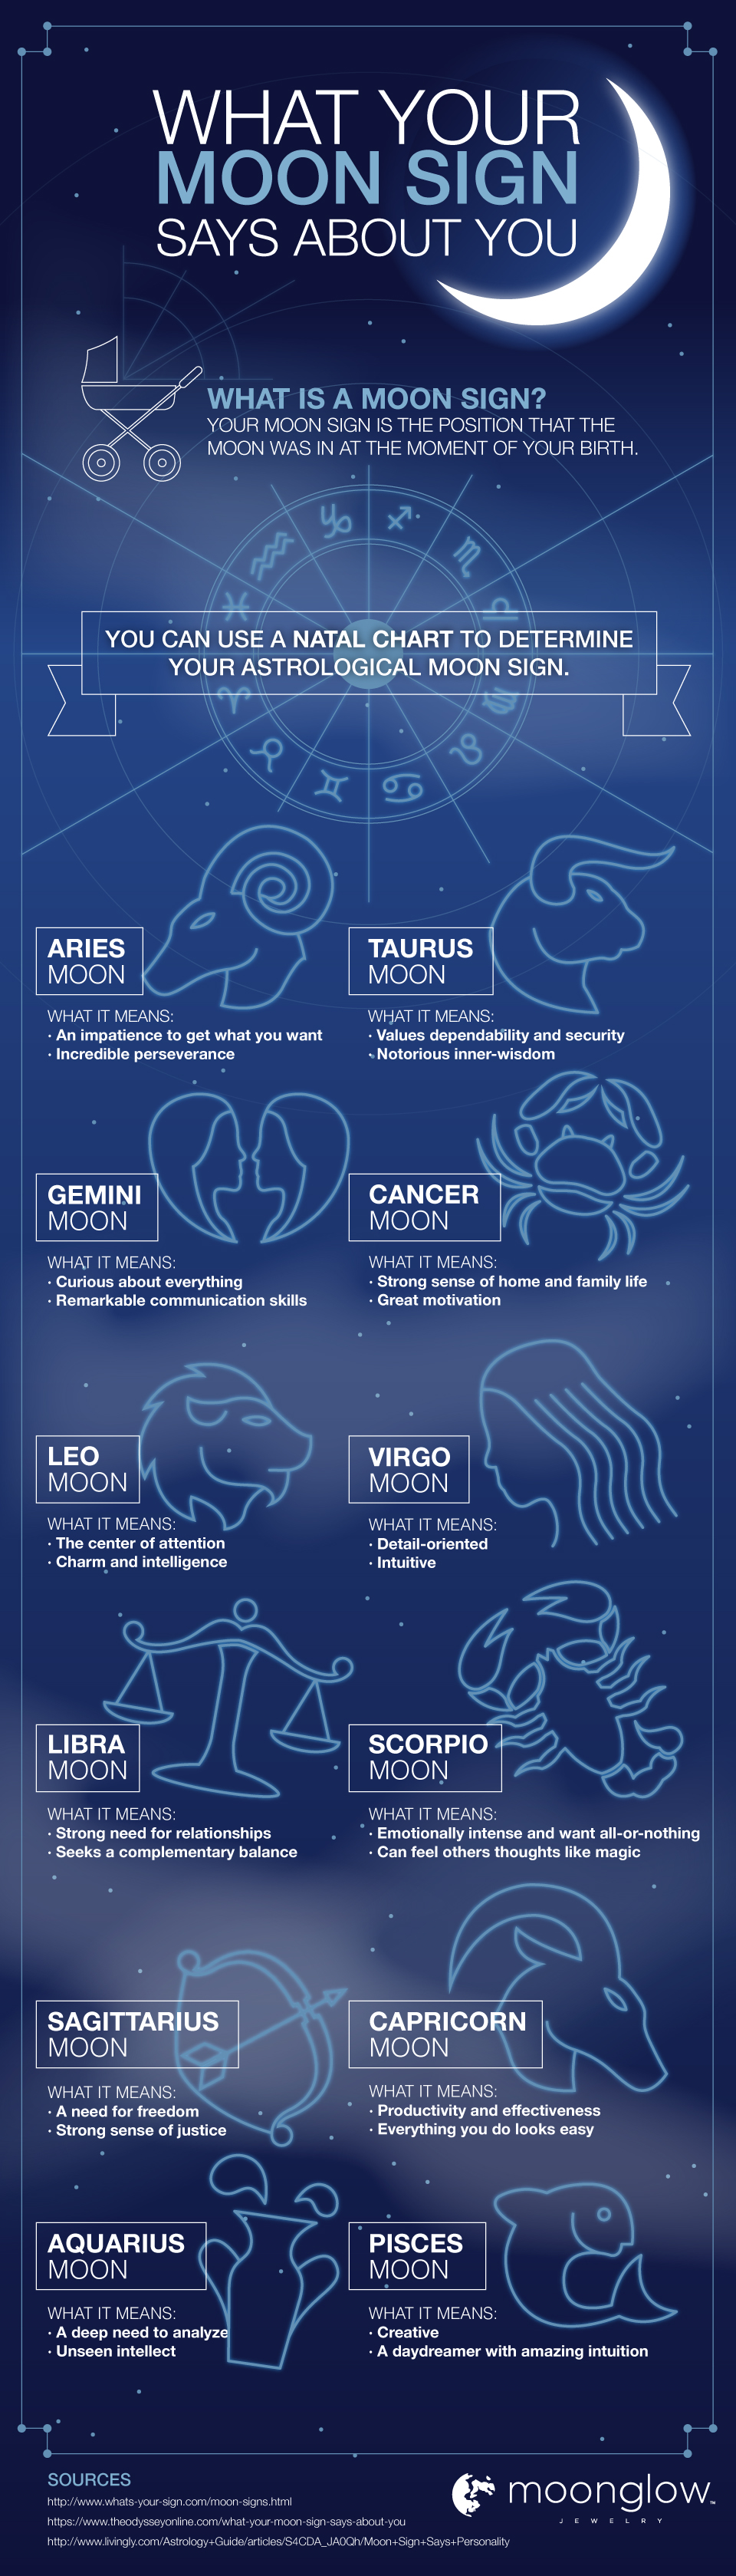 What Your Moon Sign Says About You?